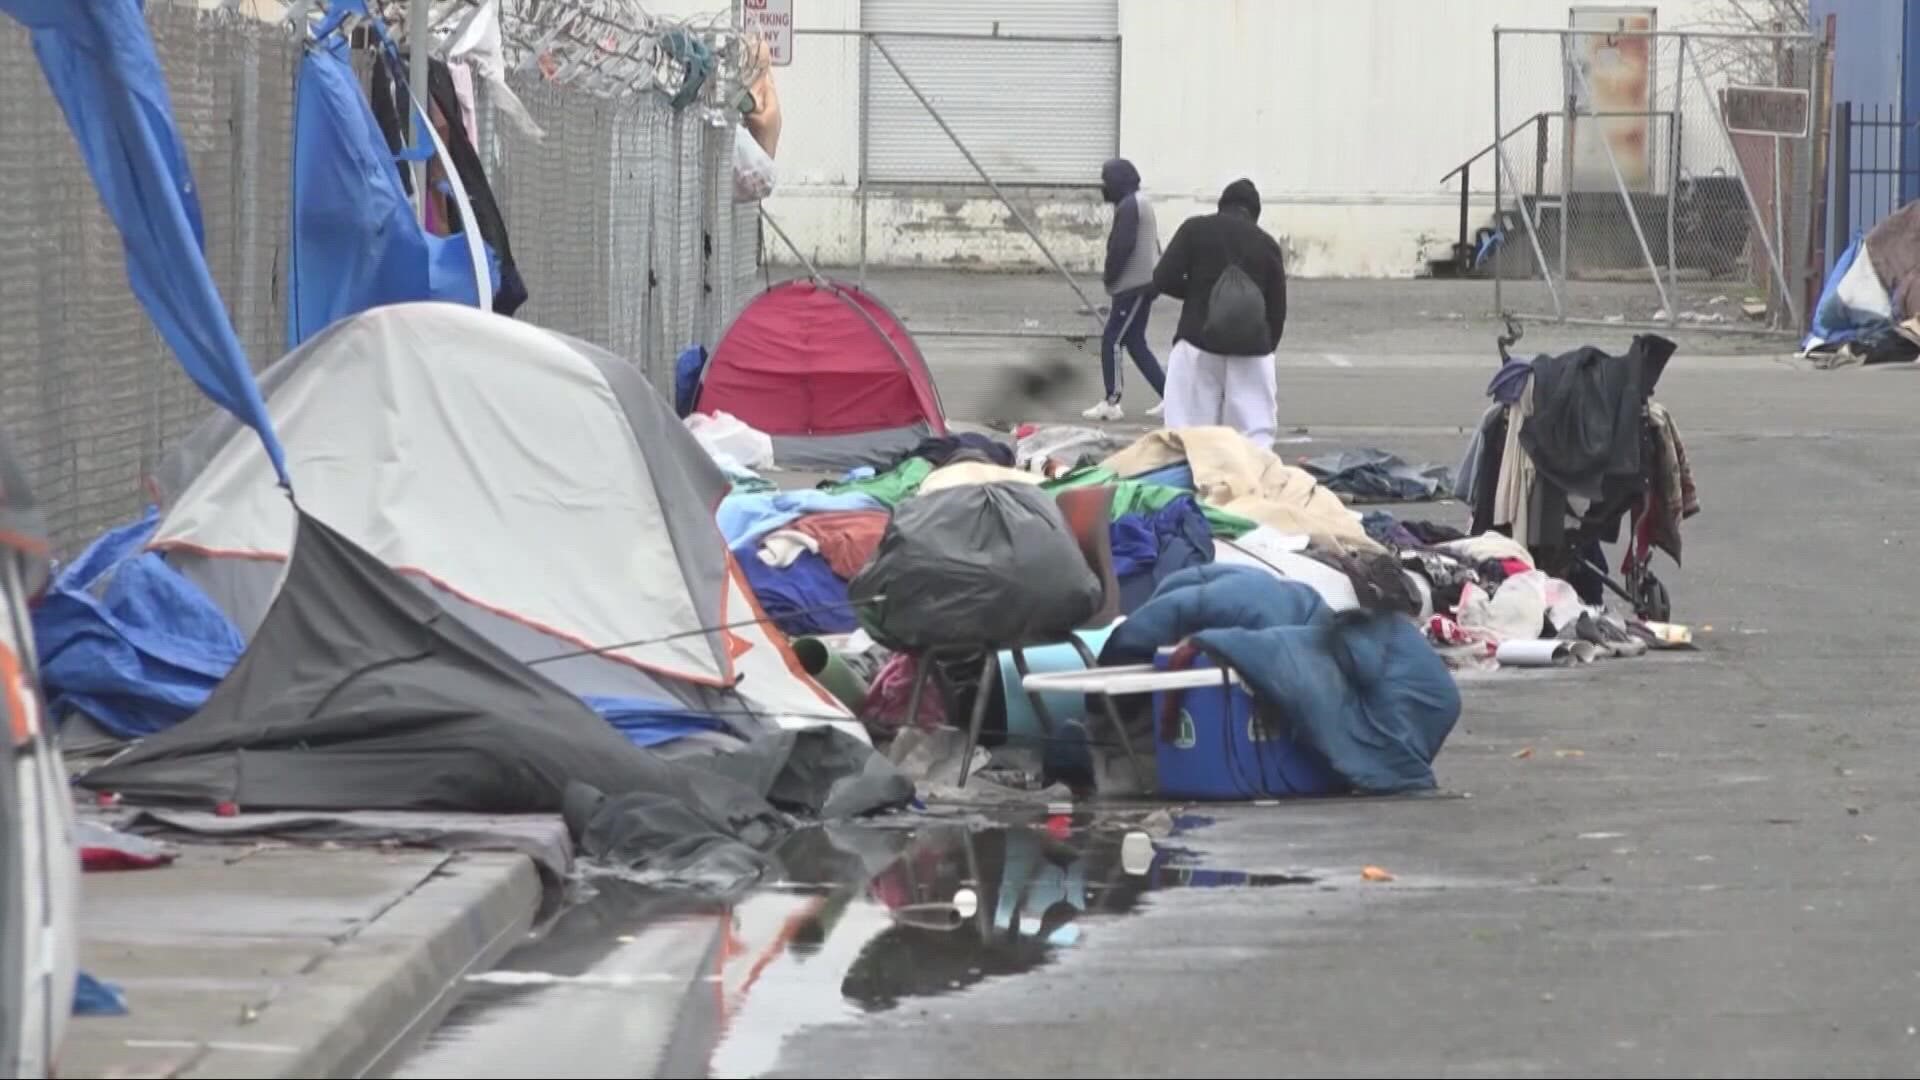 A first-of-its-kind agreement between the city and the county seeks to up the response to homelessness.